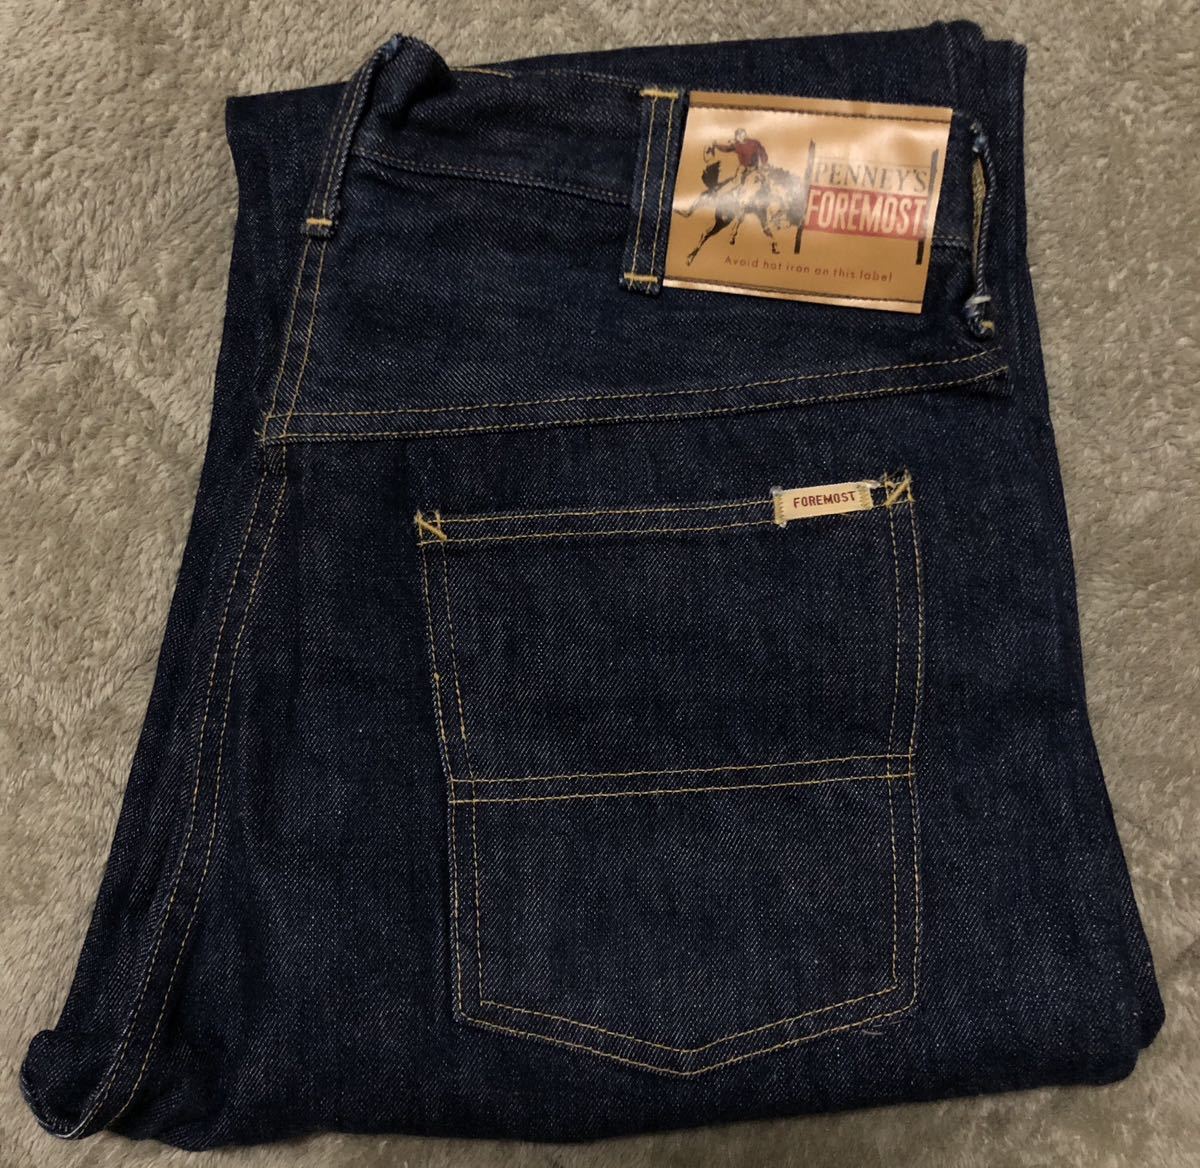 50's 濃紺PENNY'S FOREMOST 5POCKET JEANS W32/片耳！ペニーズ1WASH？の画像1